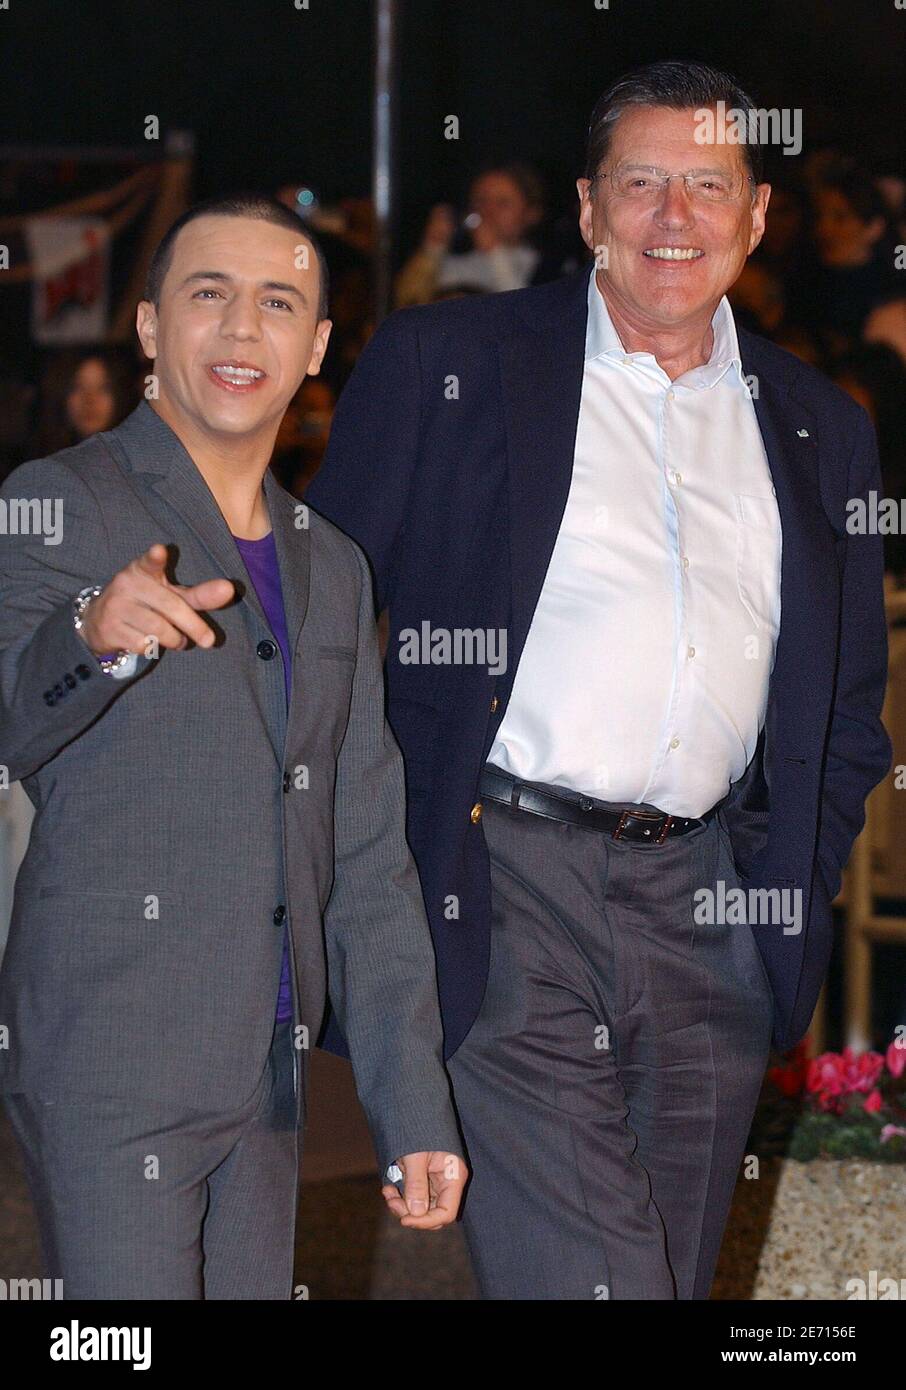 Faudel and producer Jean-Claude Camus attend the 2007 NRJ Music Awards held at the Palais des Festivals in Cannes, France on January 20, 2007. Photo by Khayat-Nebinger-Gorassini/ABACAPRESS.COM Stock Photo